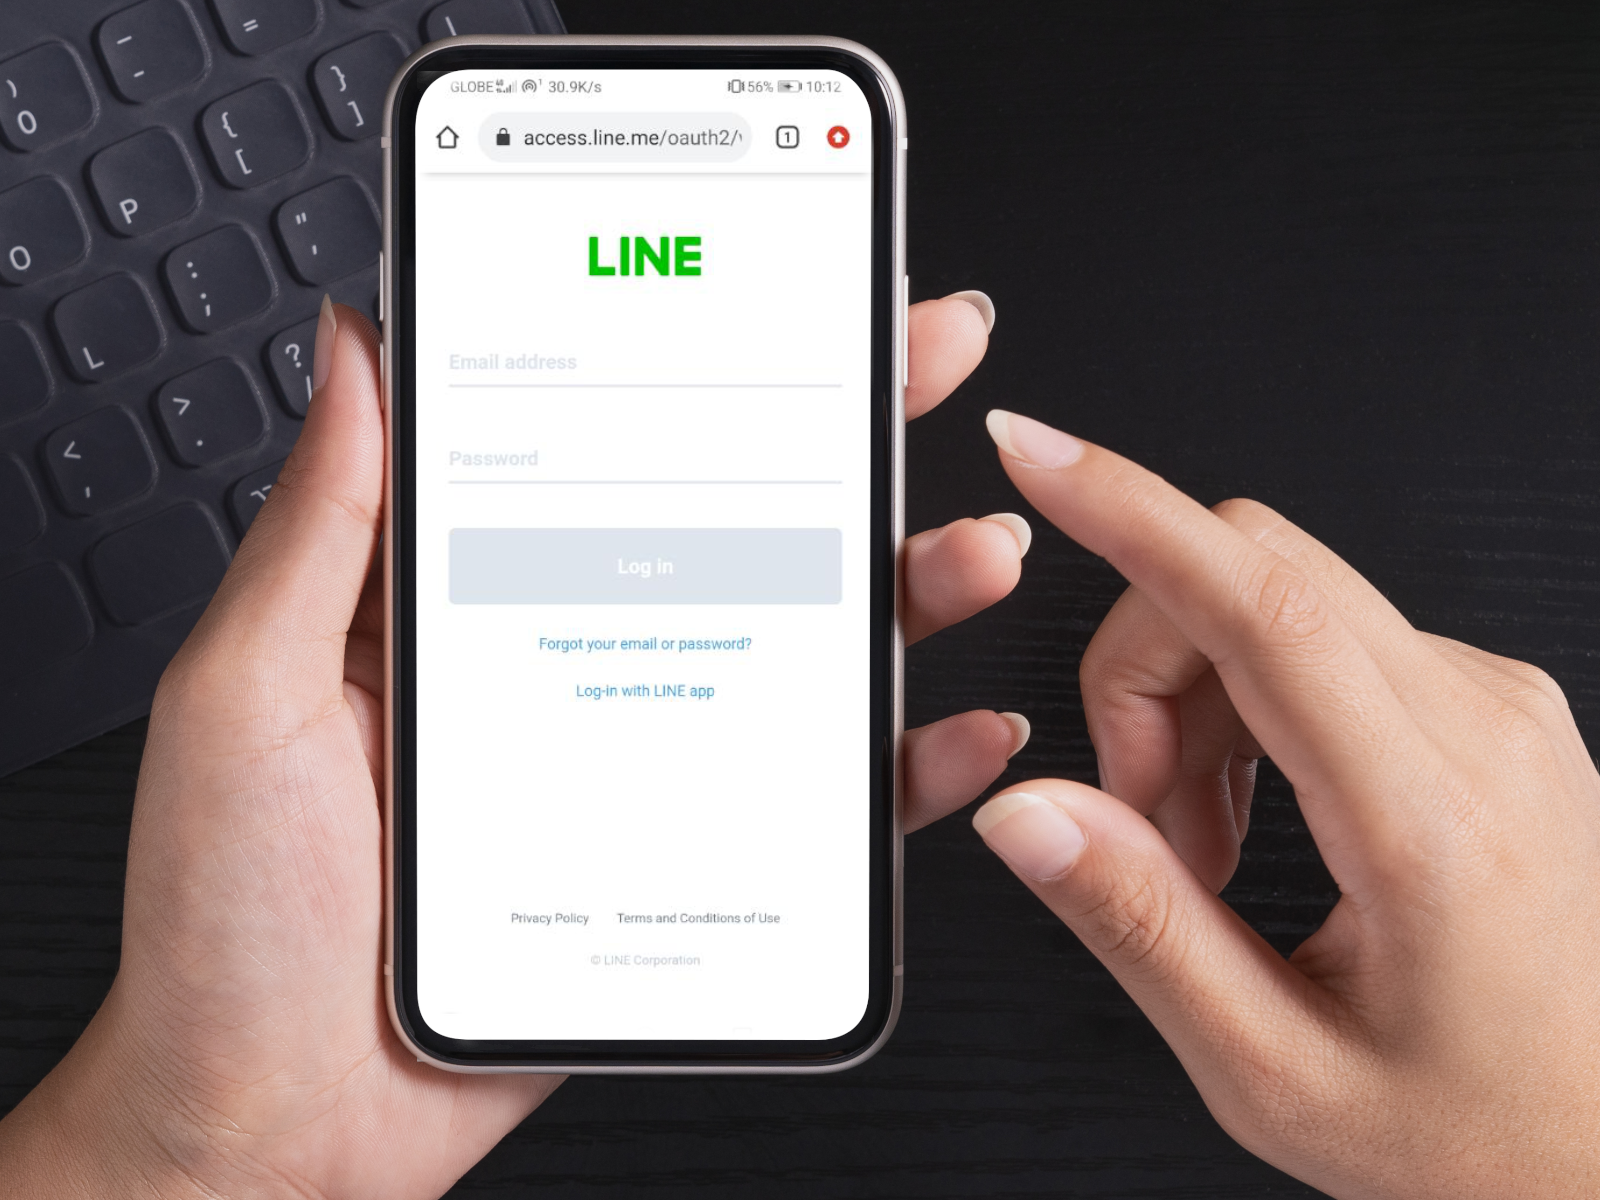 Going onLINE in Thailand: Guide in Setting Up Your LINE Account | Digital 38